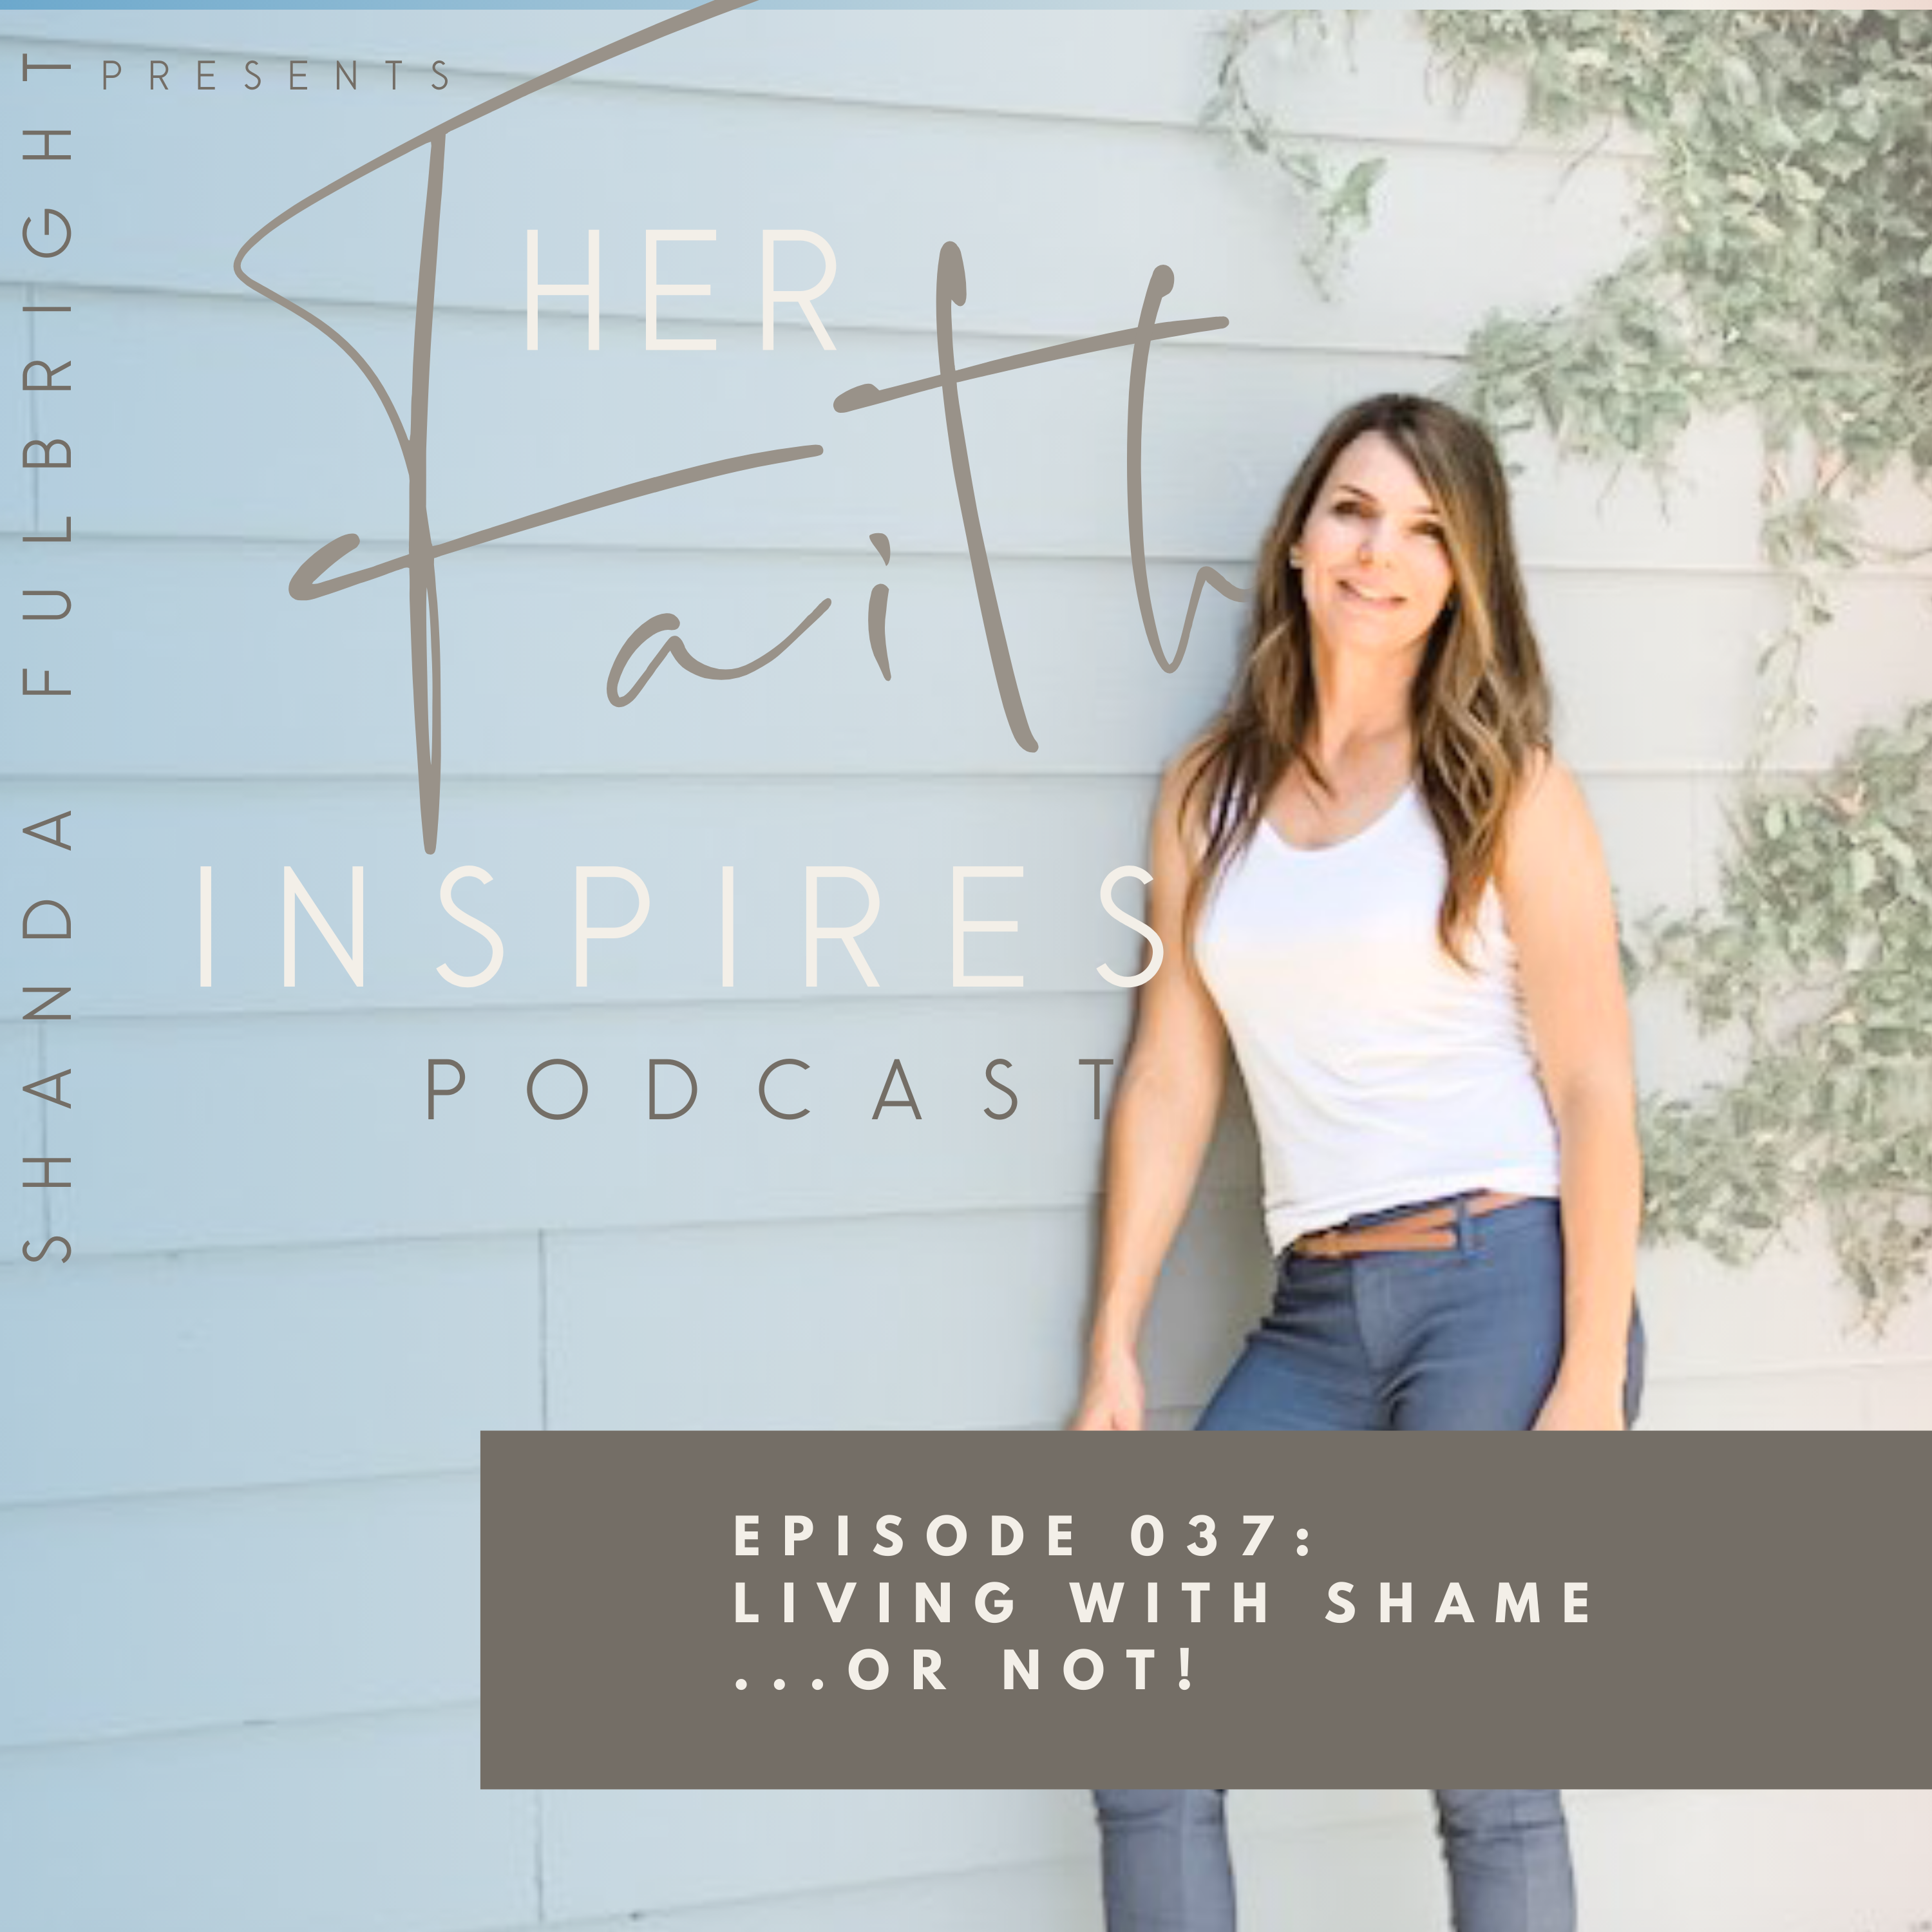 SF Podcast Episode 37 - HER FAITH INSPIRES 037 : Living with shame ...or not!